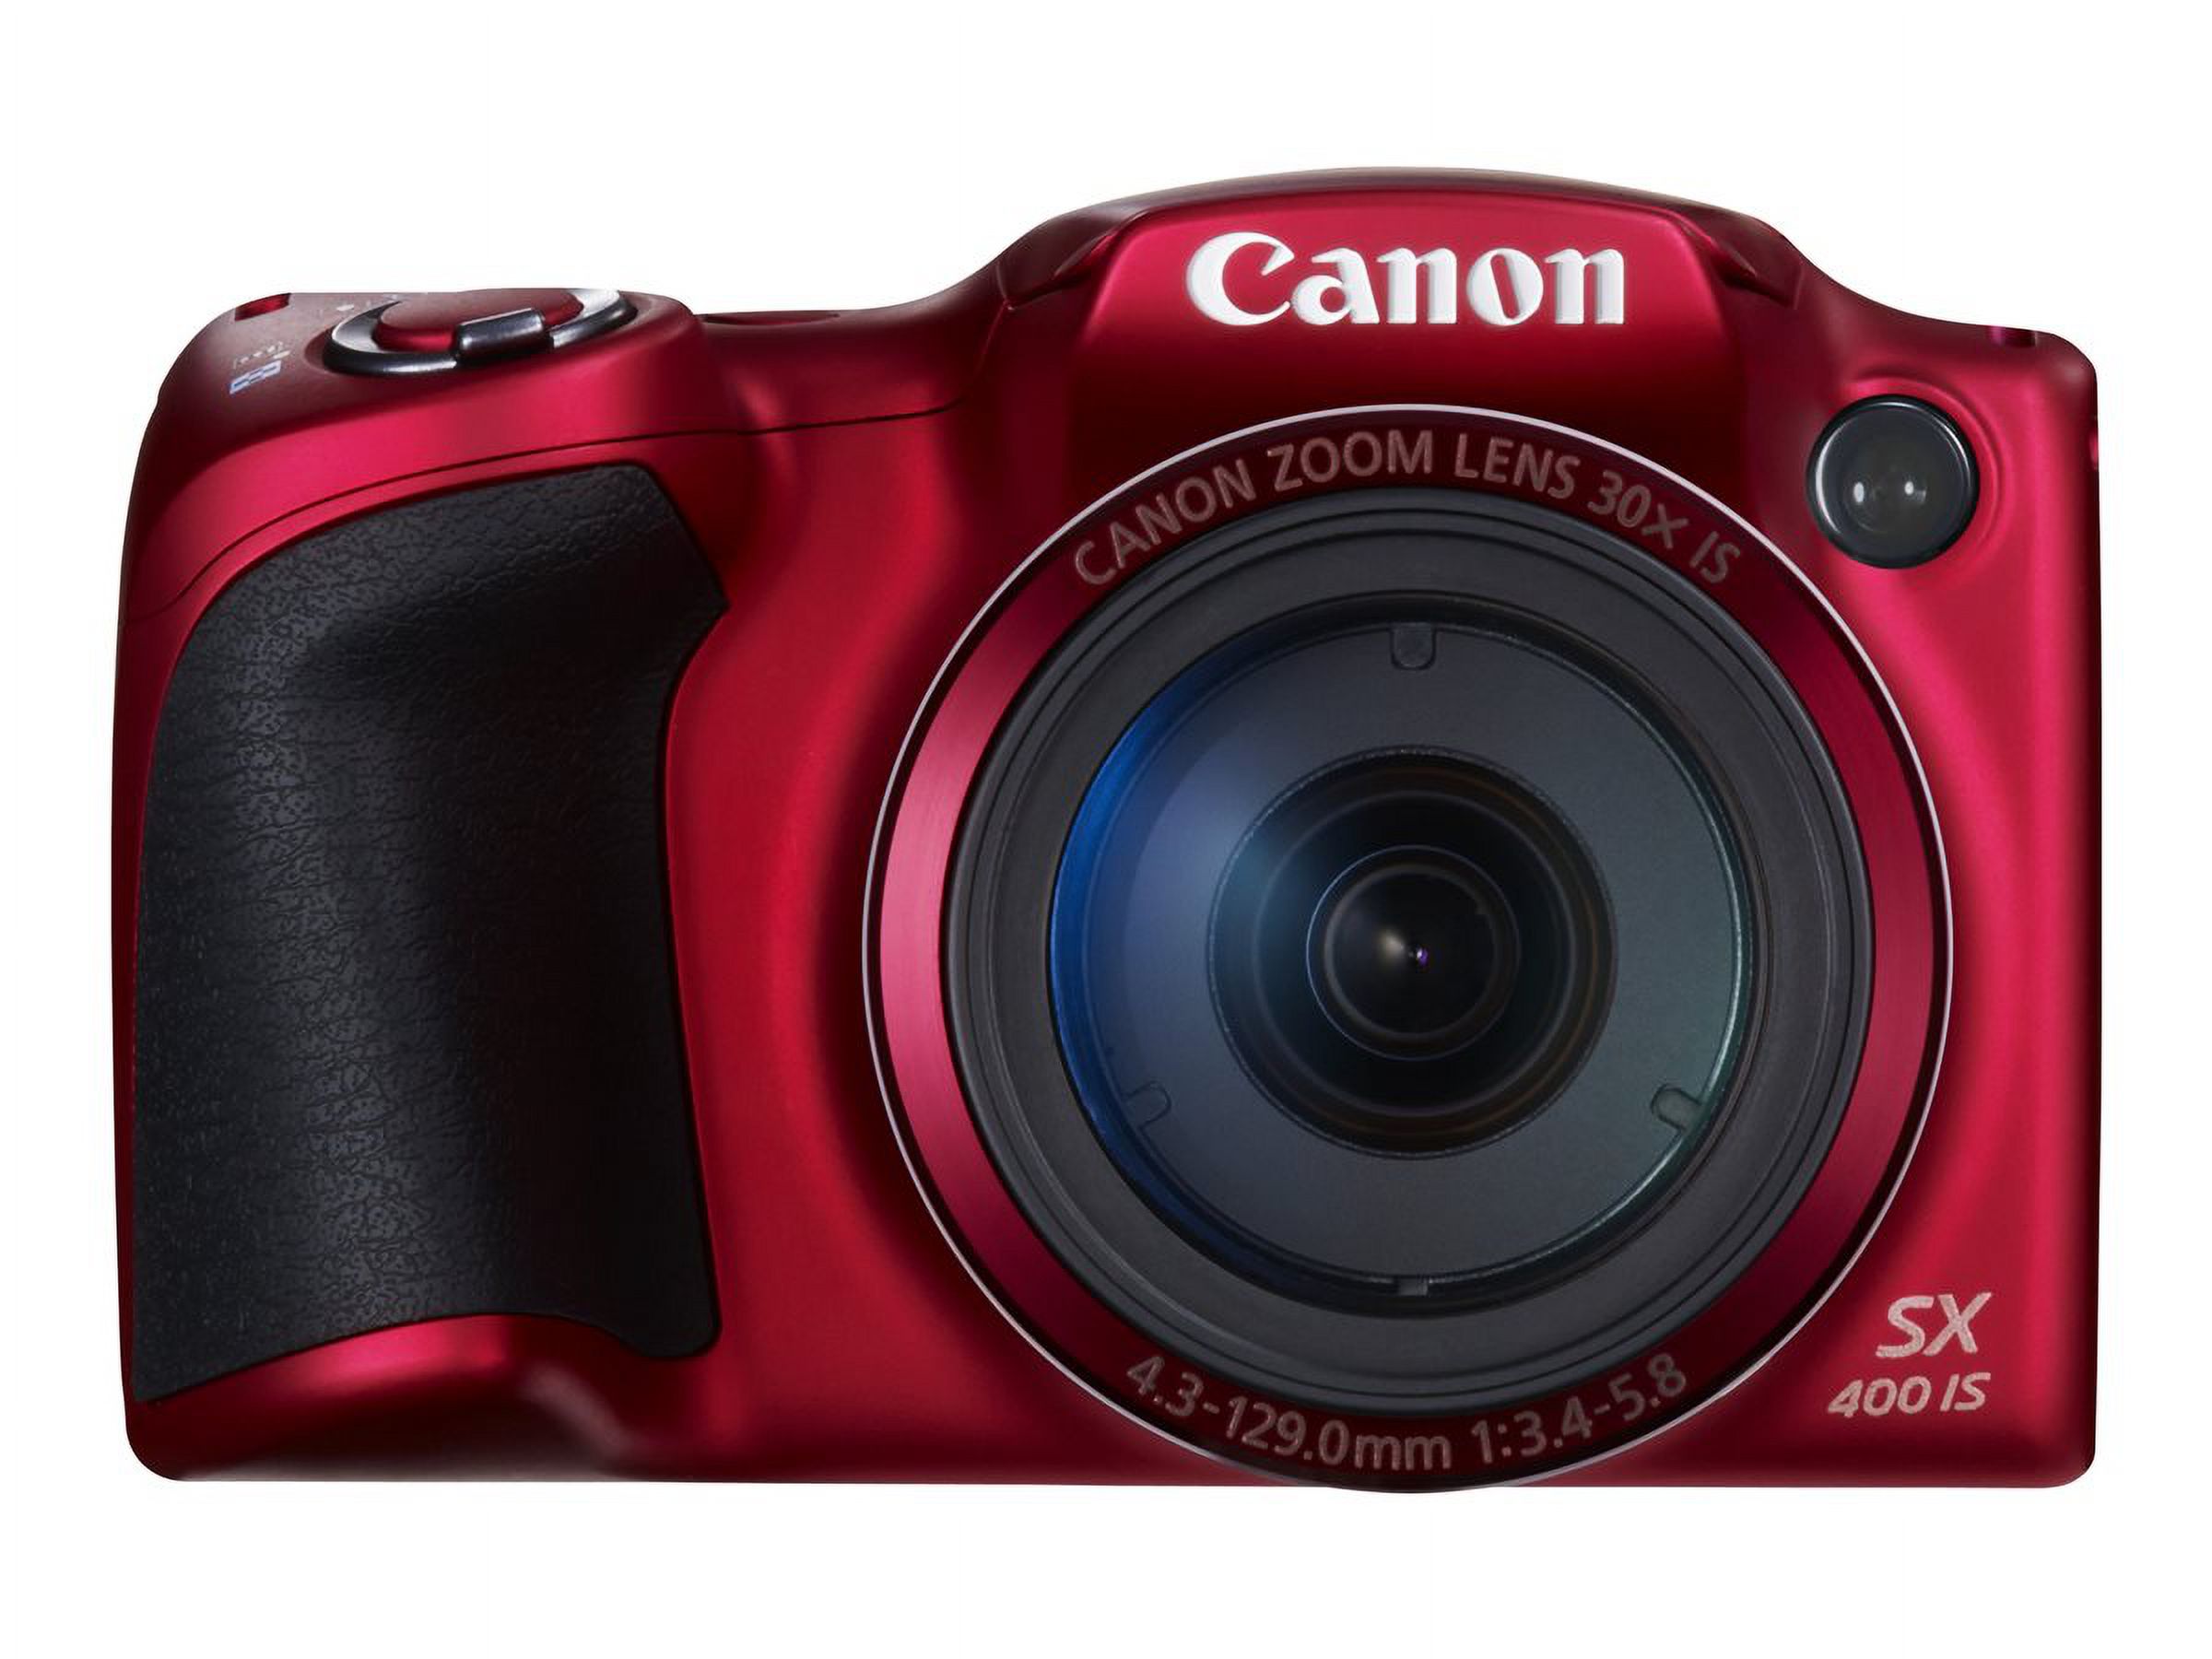 Canon PowerShot SX400 IS - Digital camera - High Definition - compact - 16.0 MP - 30 x optical zoom - red - image 59 of 72